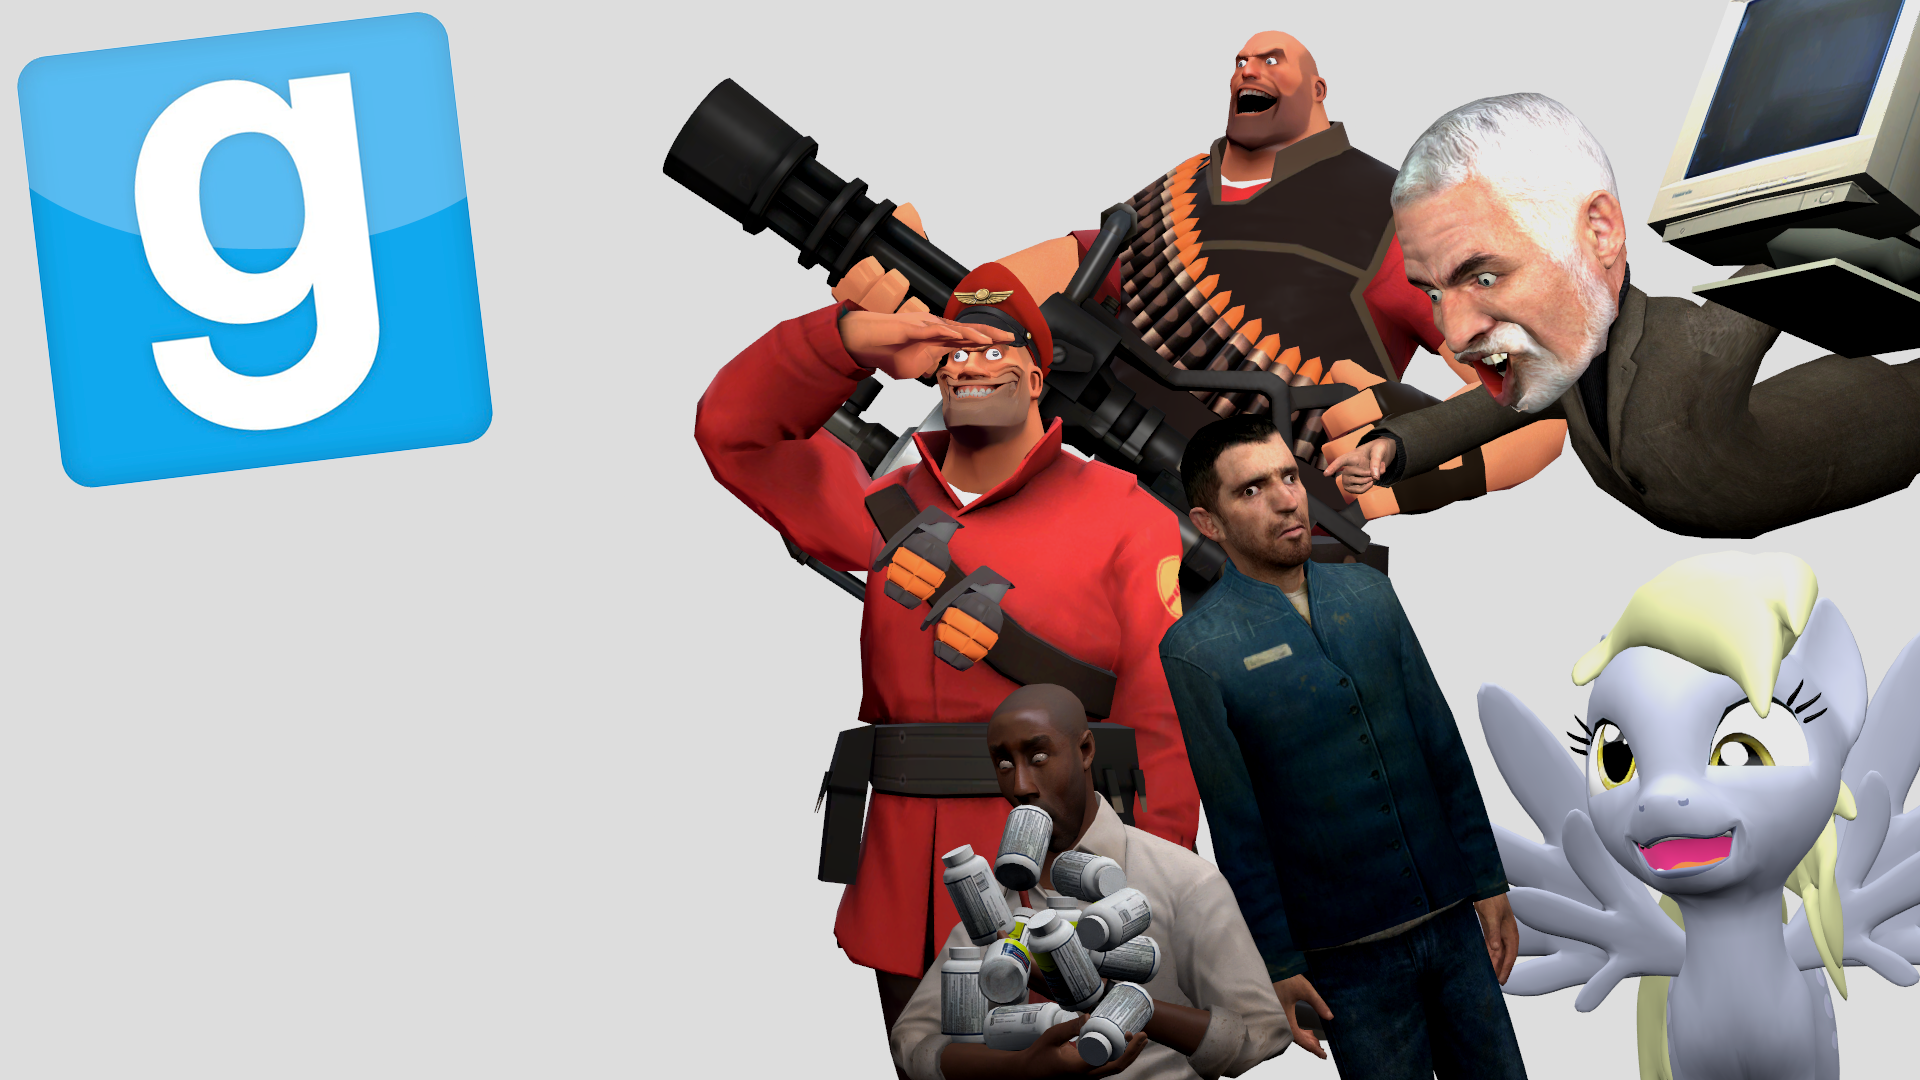 gmod download free full version pc        <h3 class=